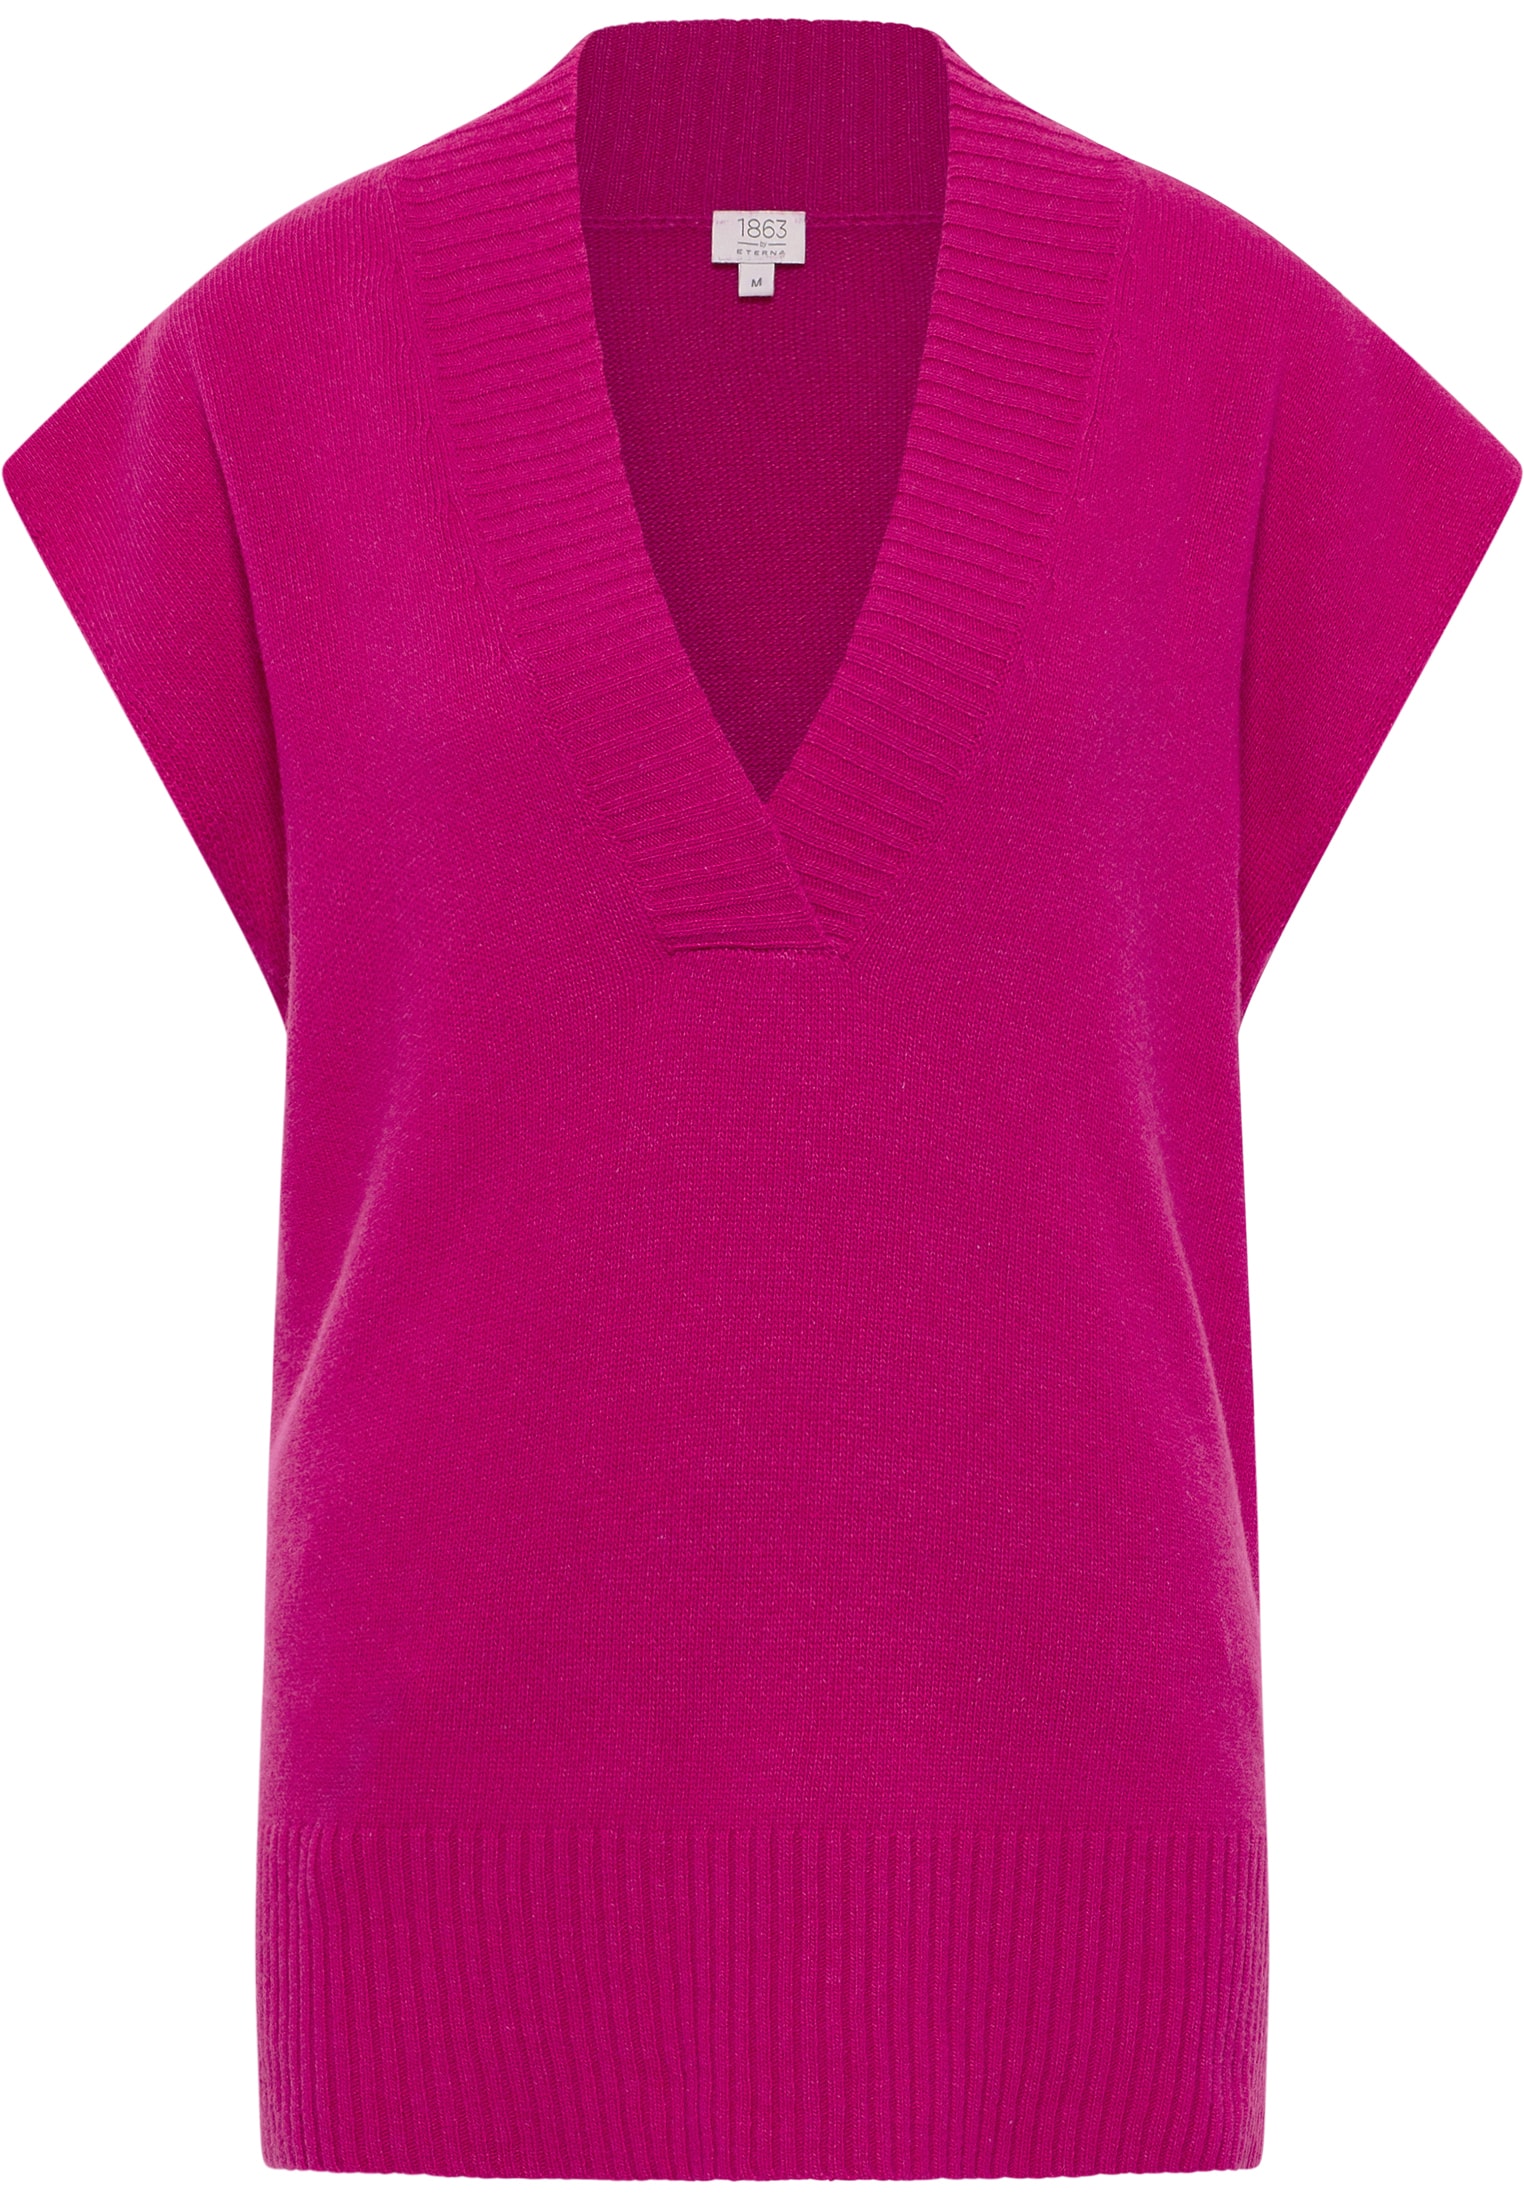 Knitted jumper in pink plain